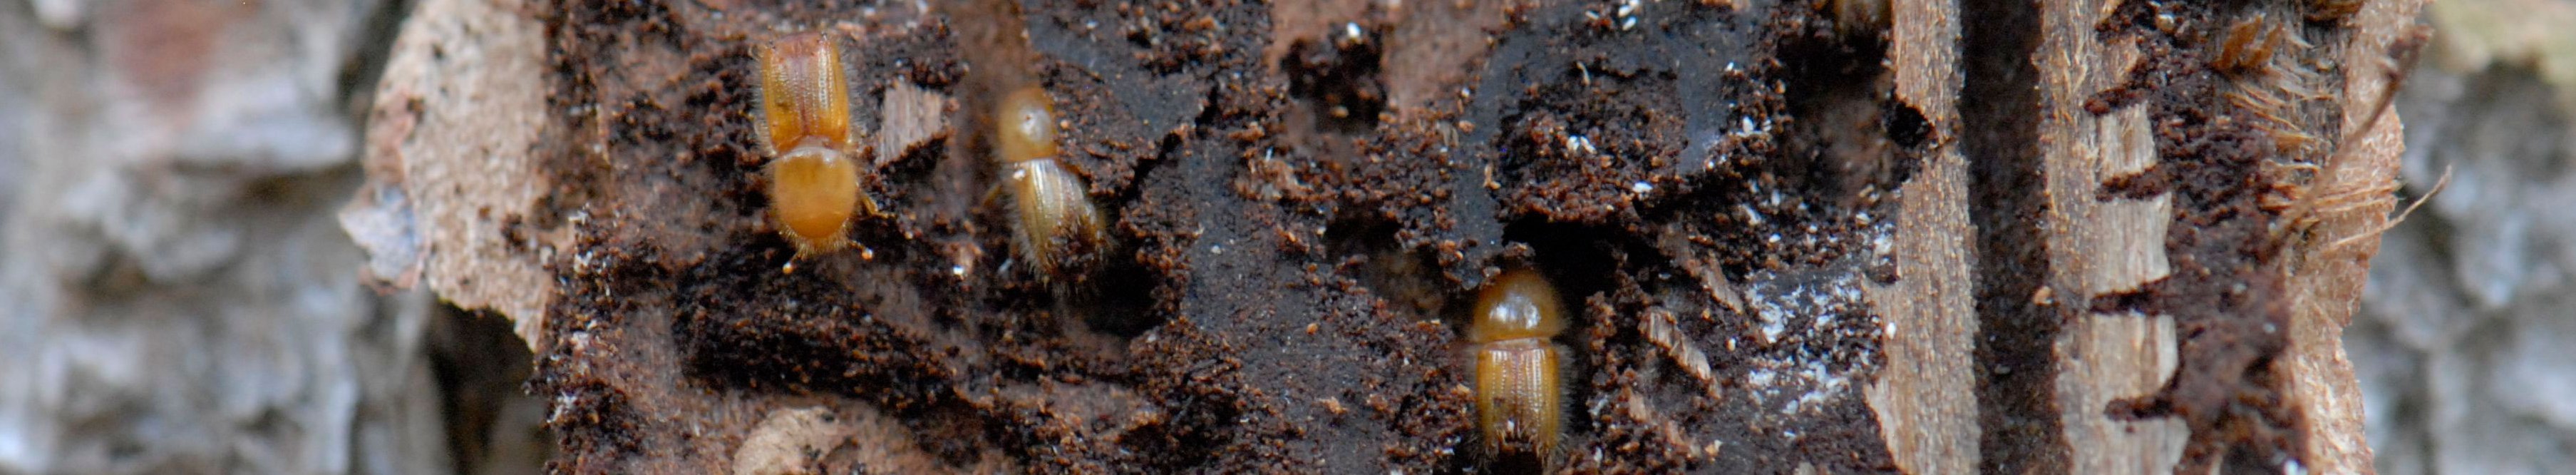 Small brown beetles in feeding tunnels under the bark